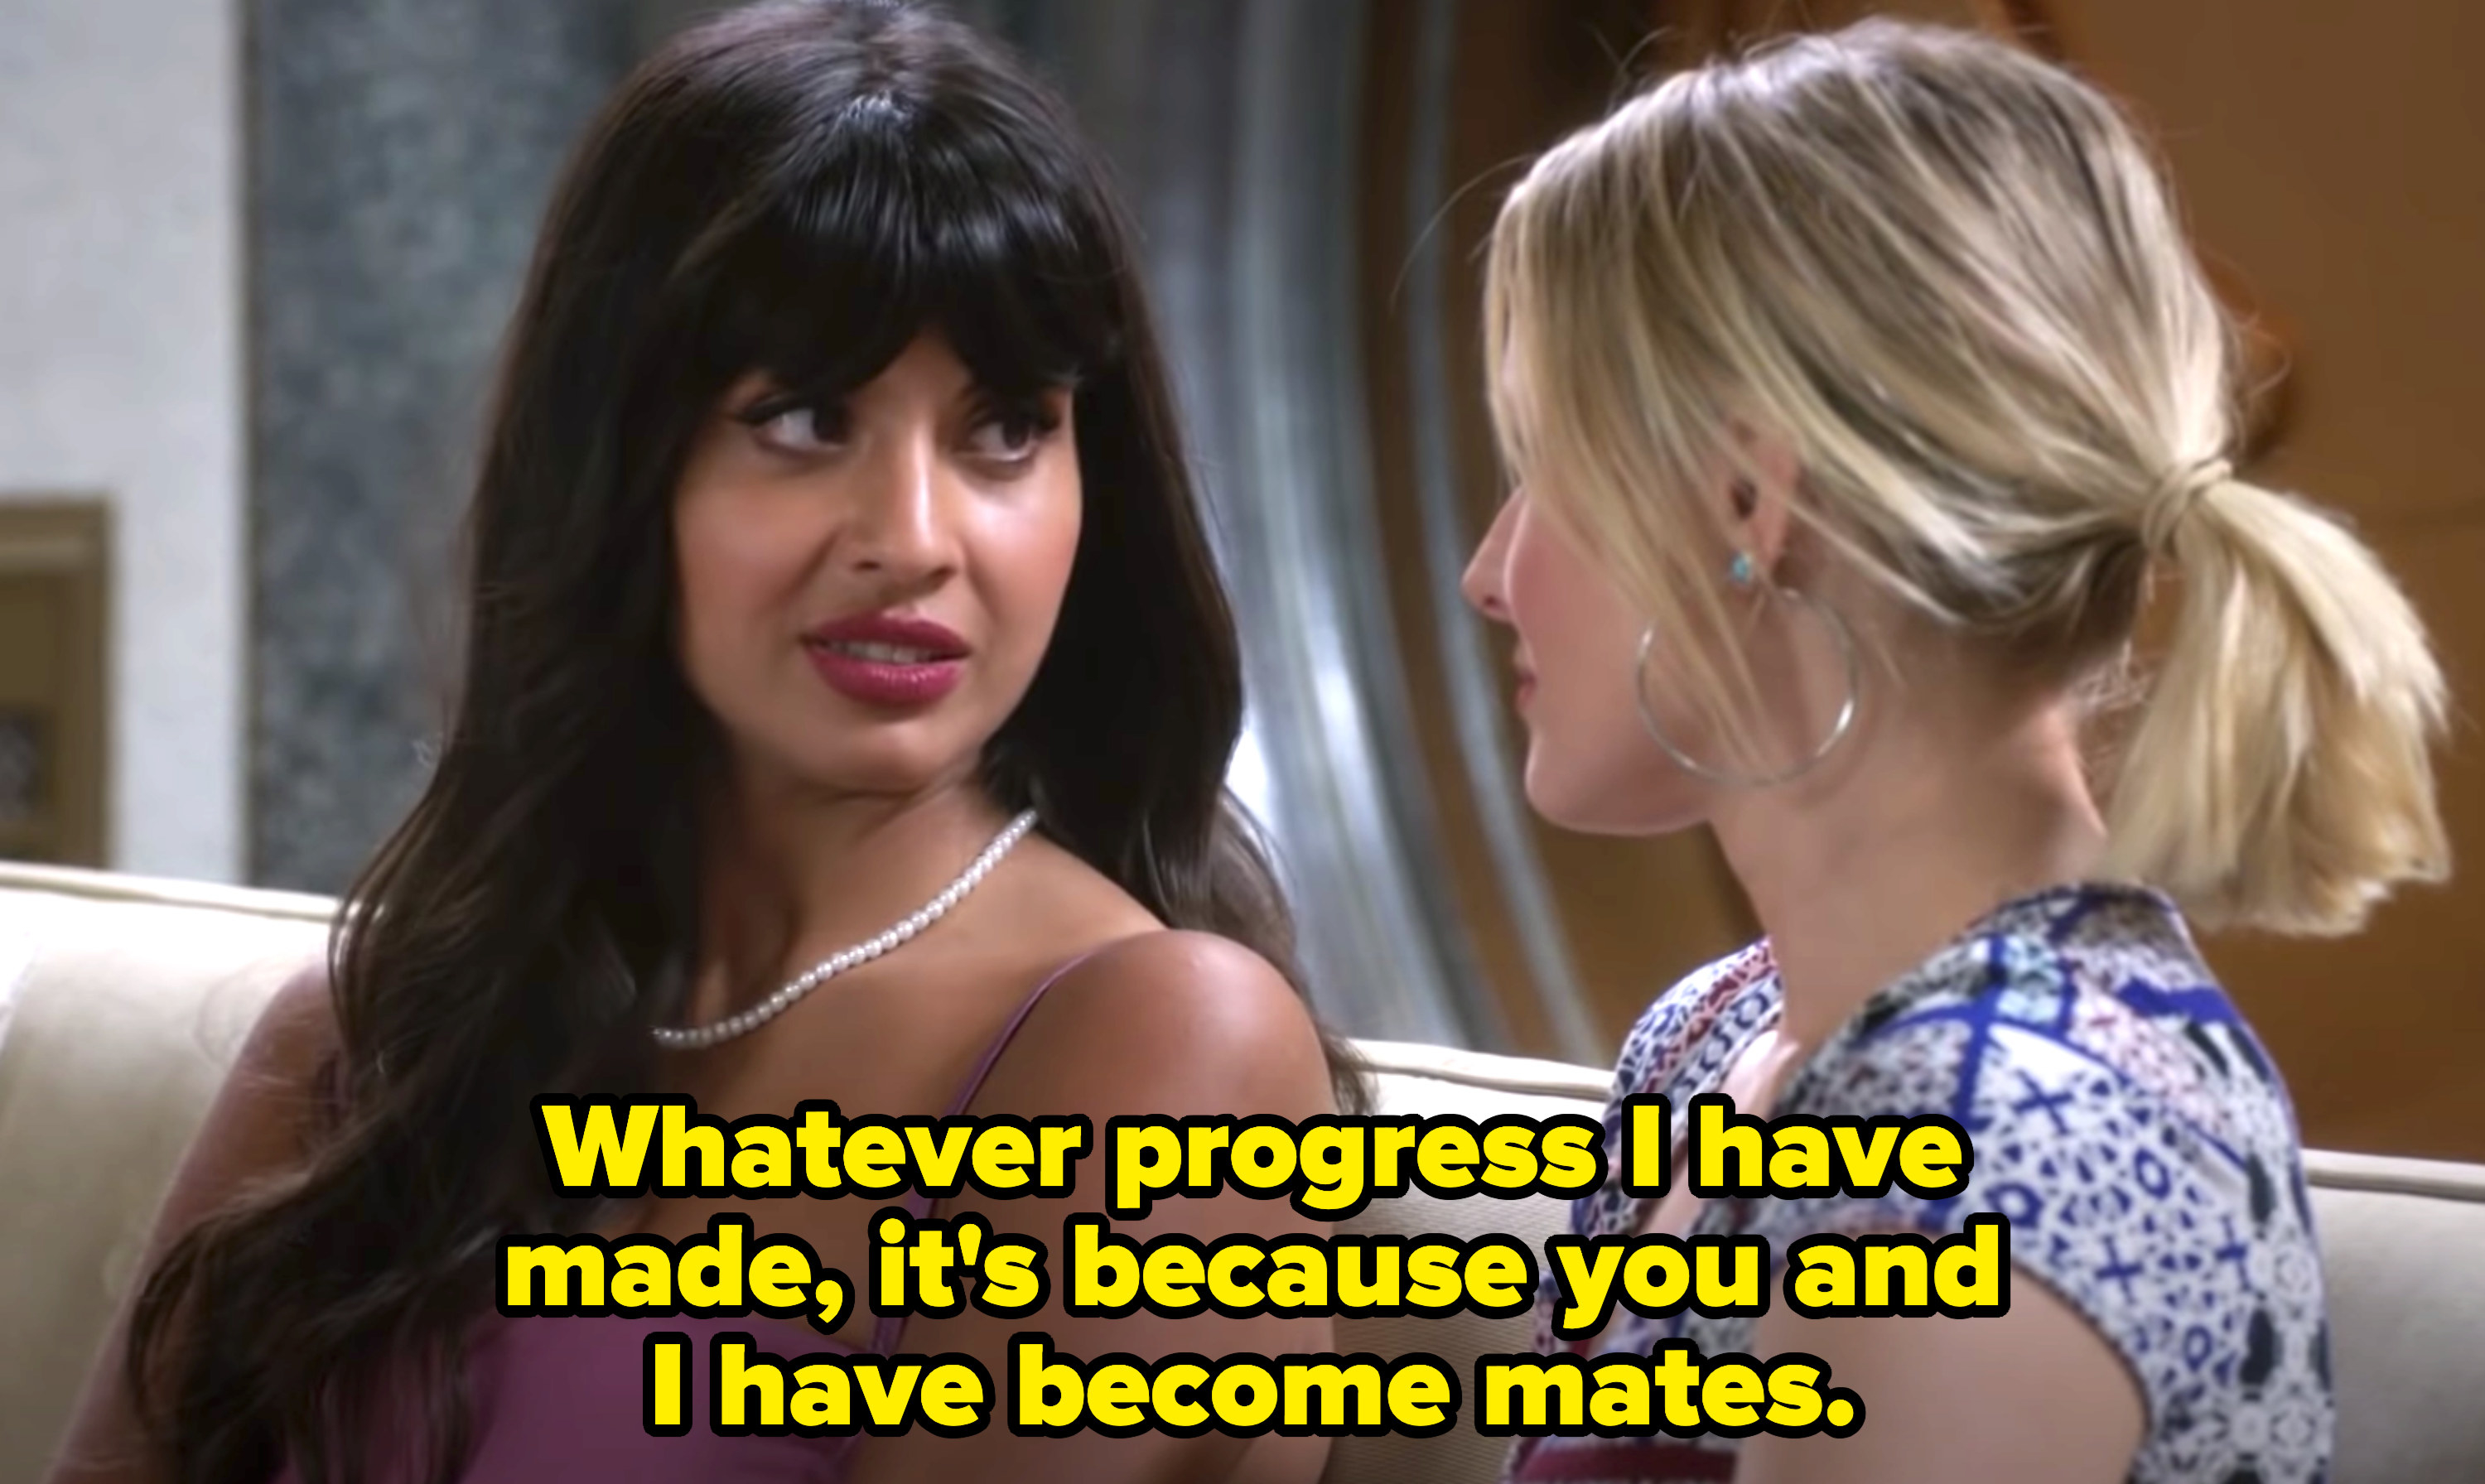 Tahani telling Eleanor, &quot;Whatever progress I have made, it&#x27;s because you and I have become mates.&quot;